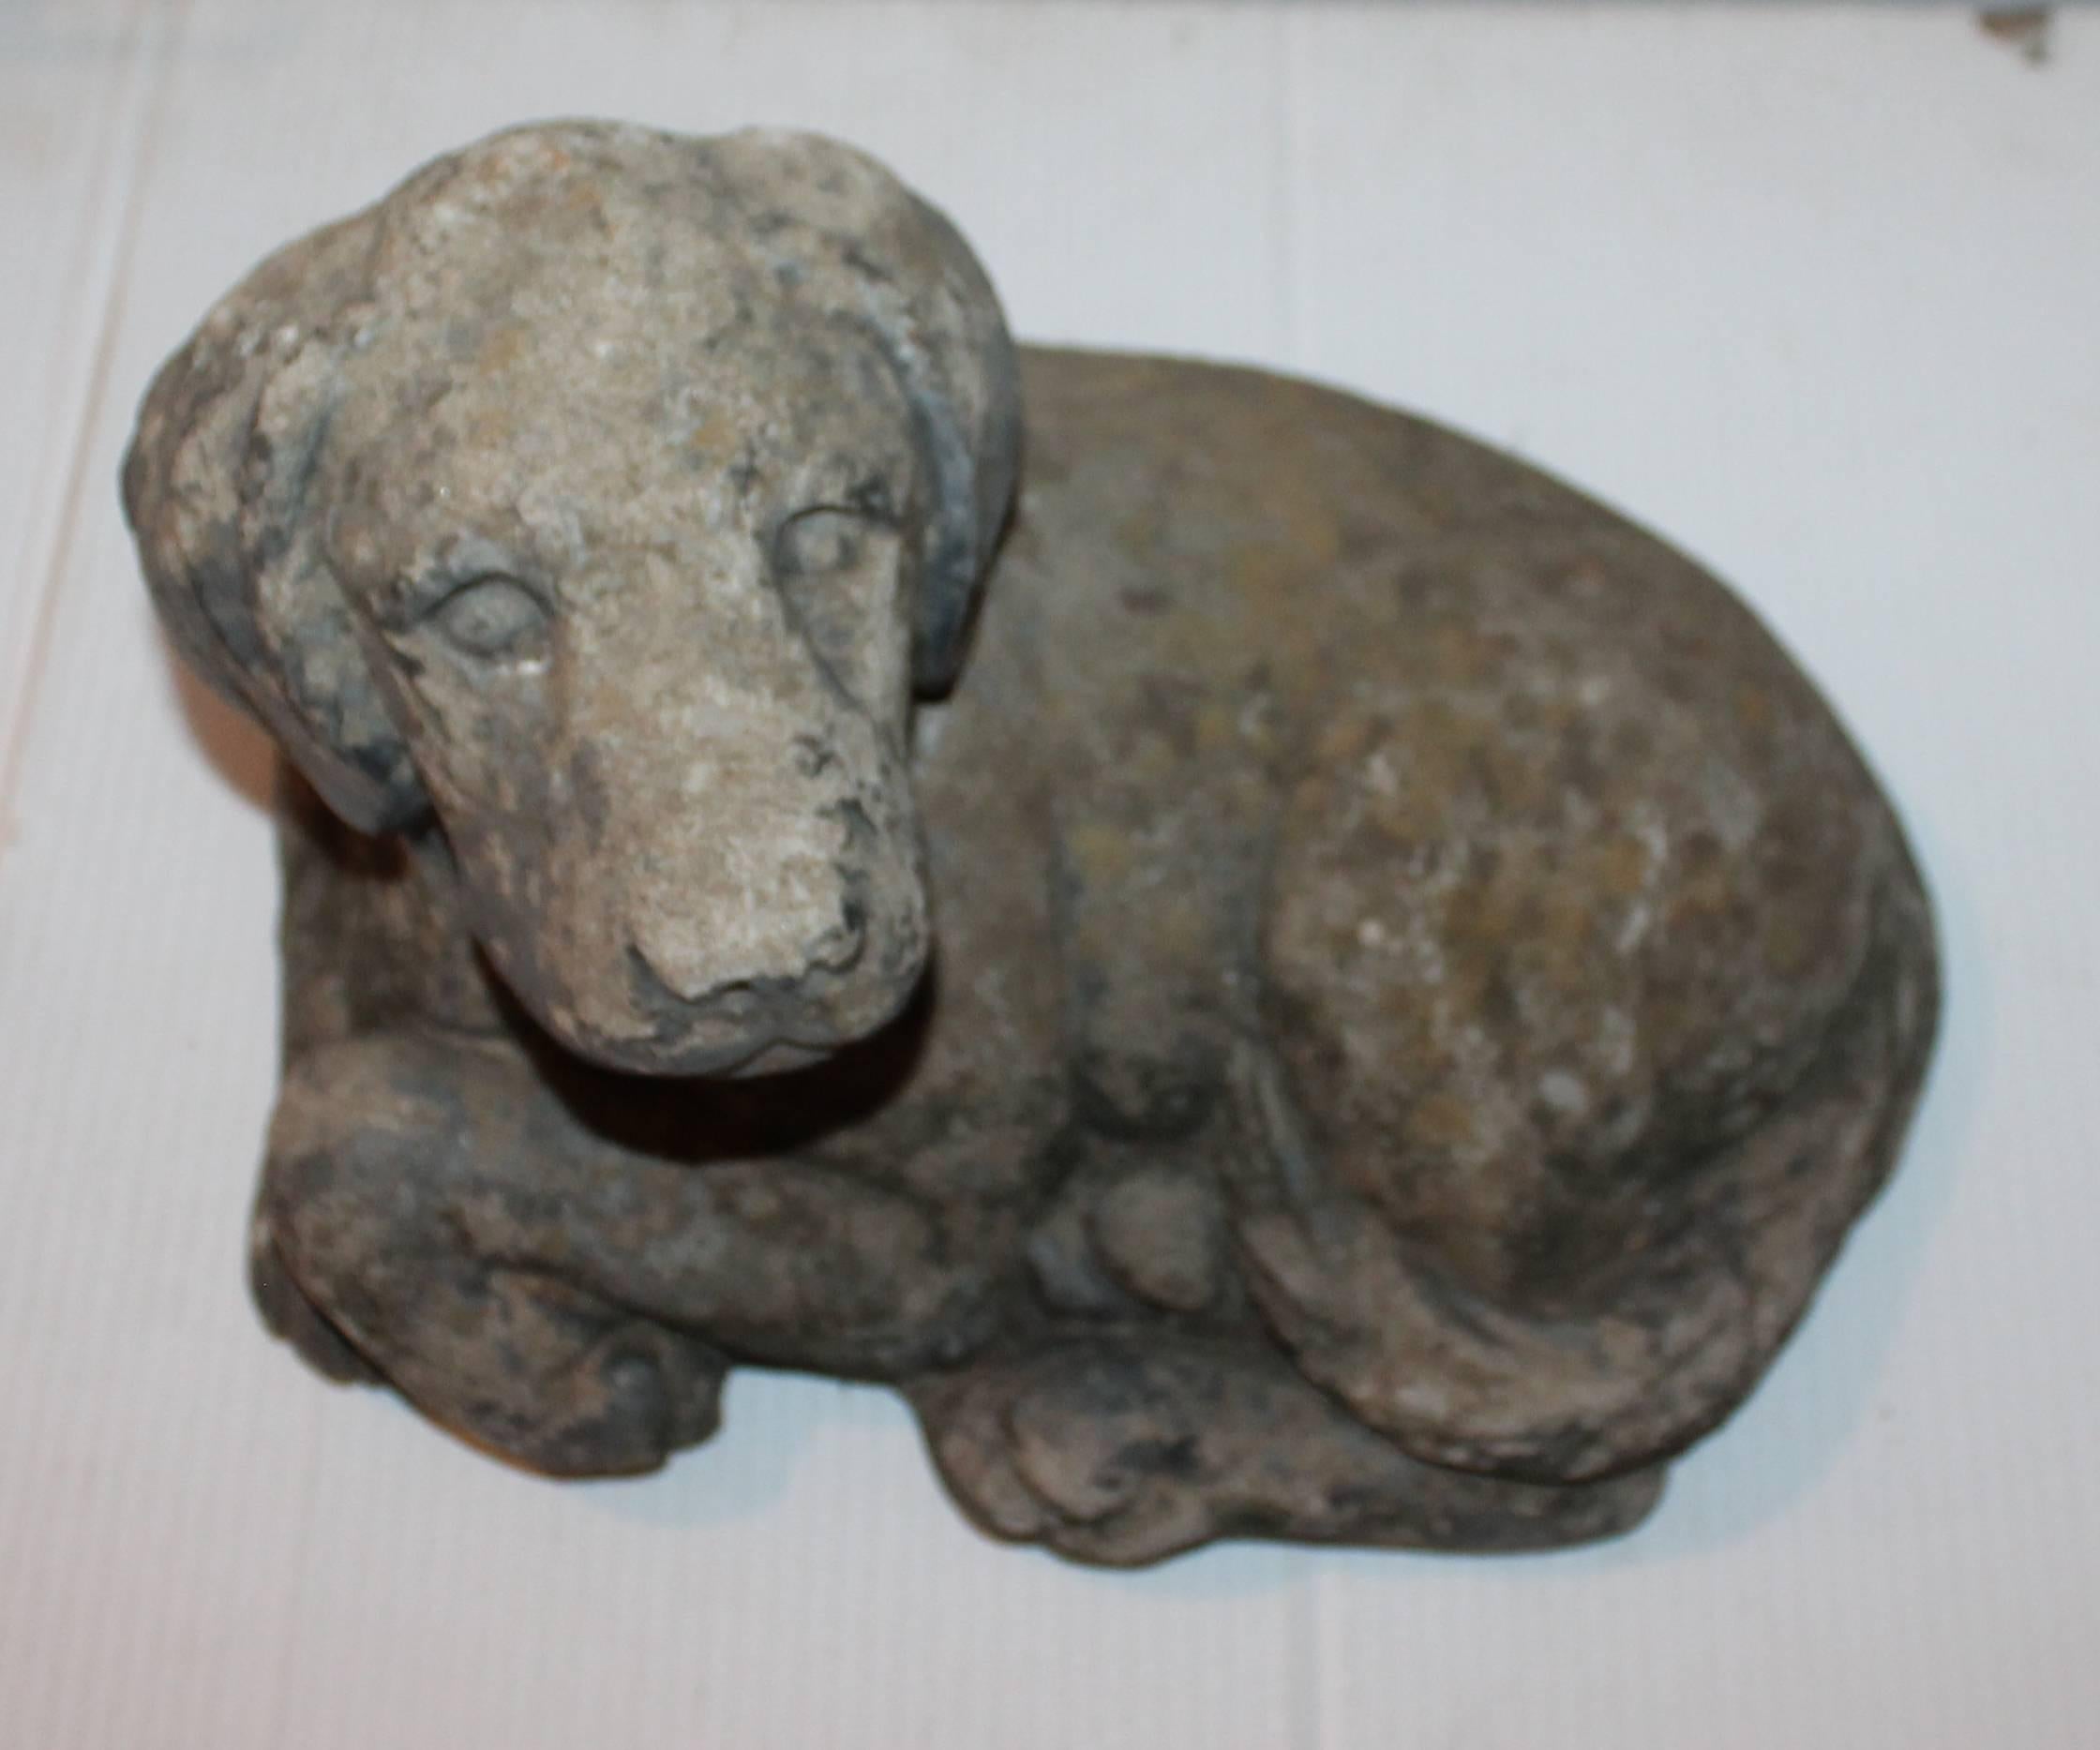 Hand-Crafted Handmade Concrete Sculpture of a Dog